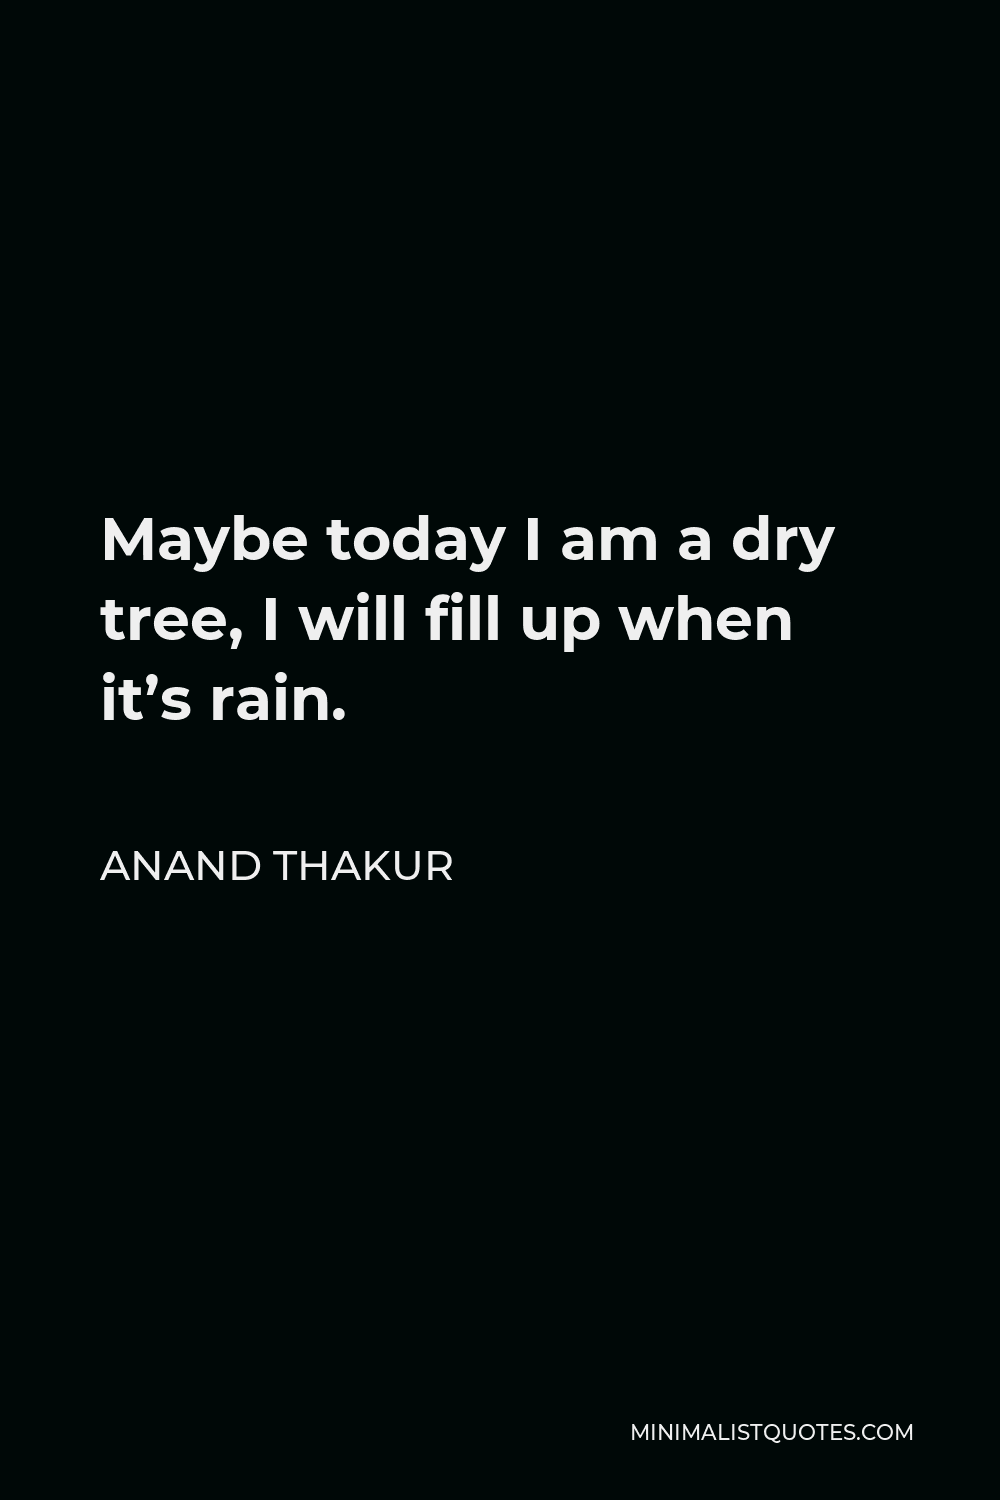 Anand Thakur Quote - Maybe today I am a dry tree, I will fill up when it’s rain.